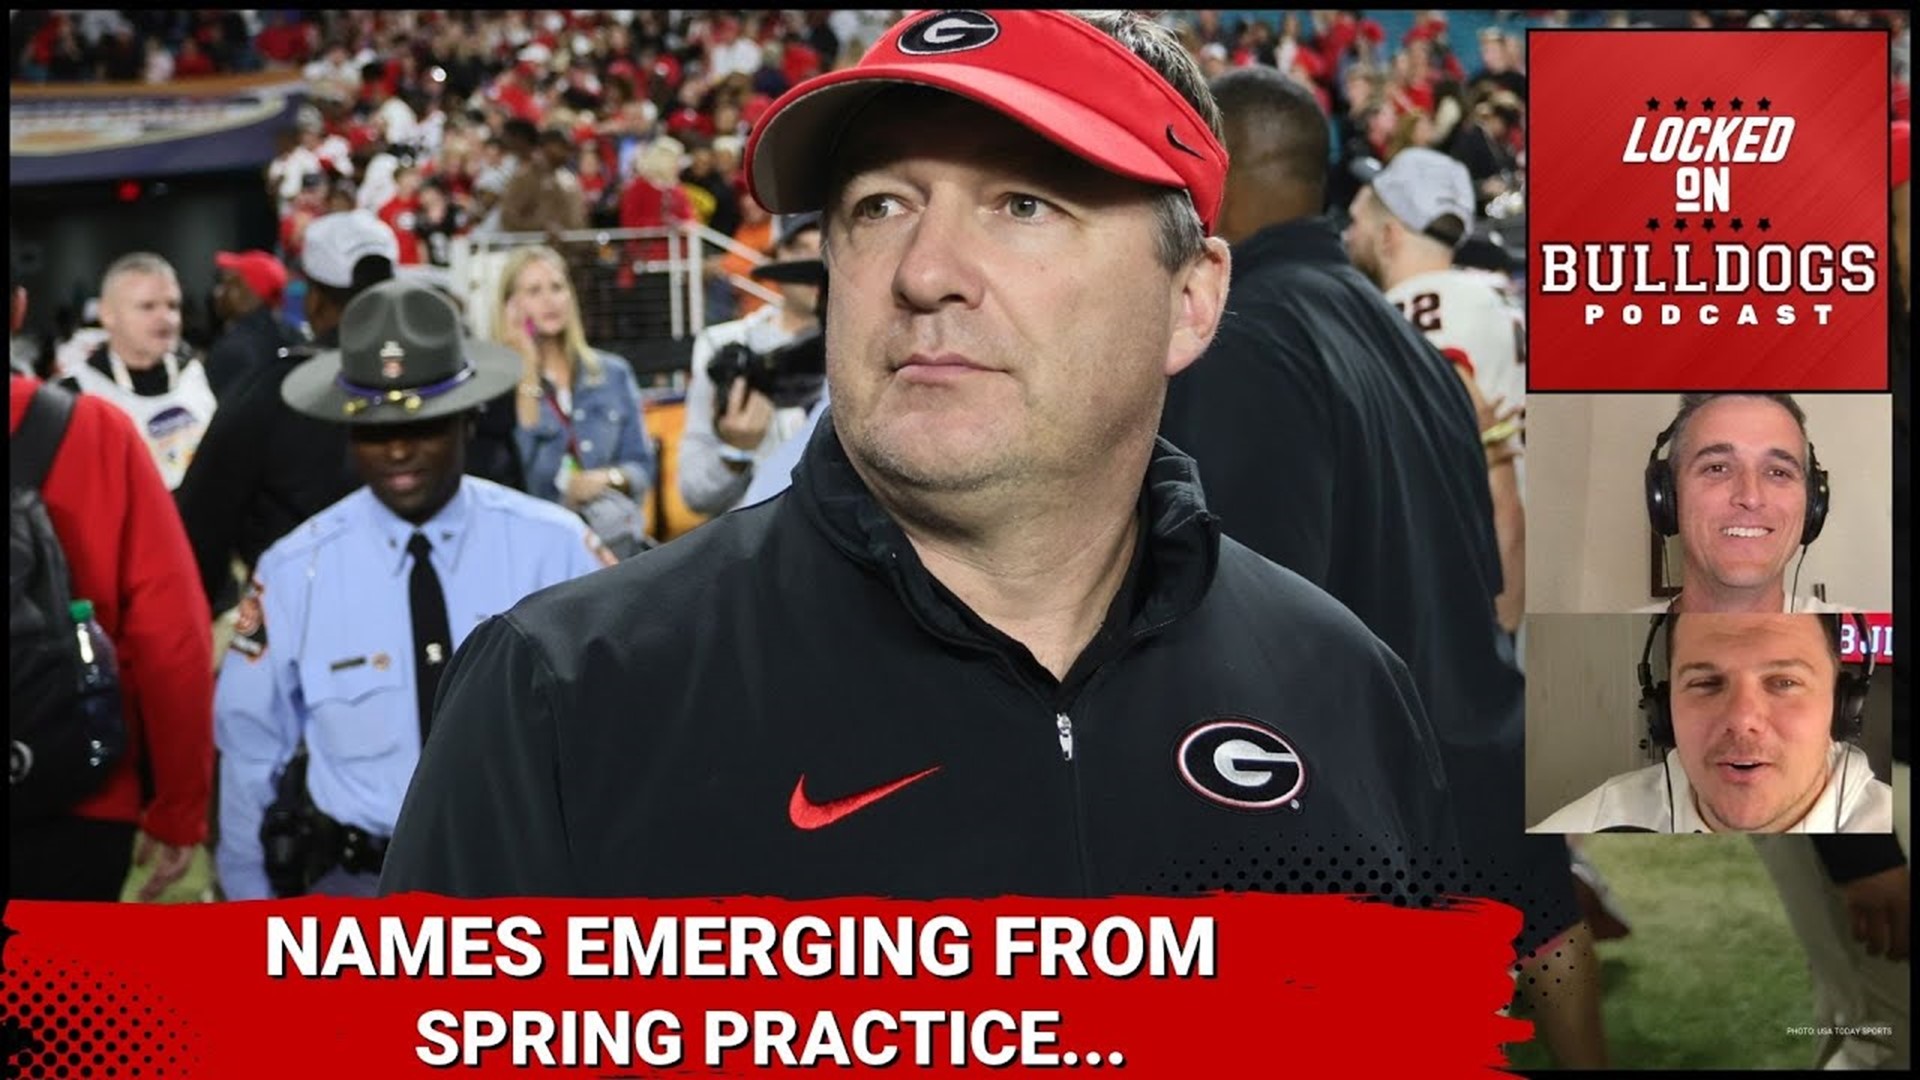 Georgia Football already has some interesting names emerging from Spring Practice...